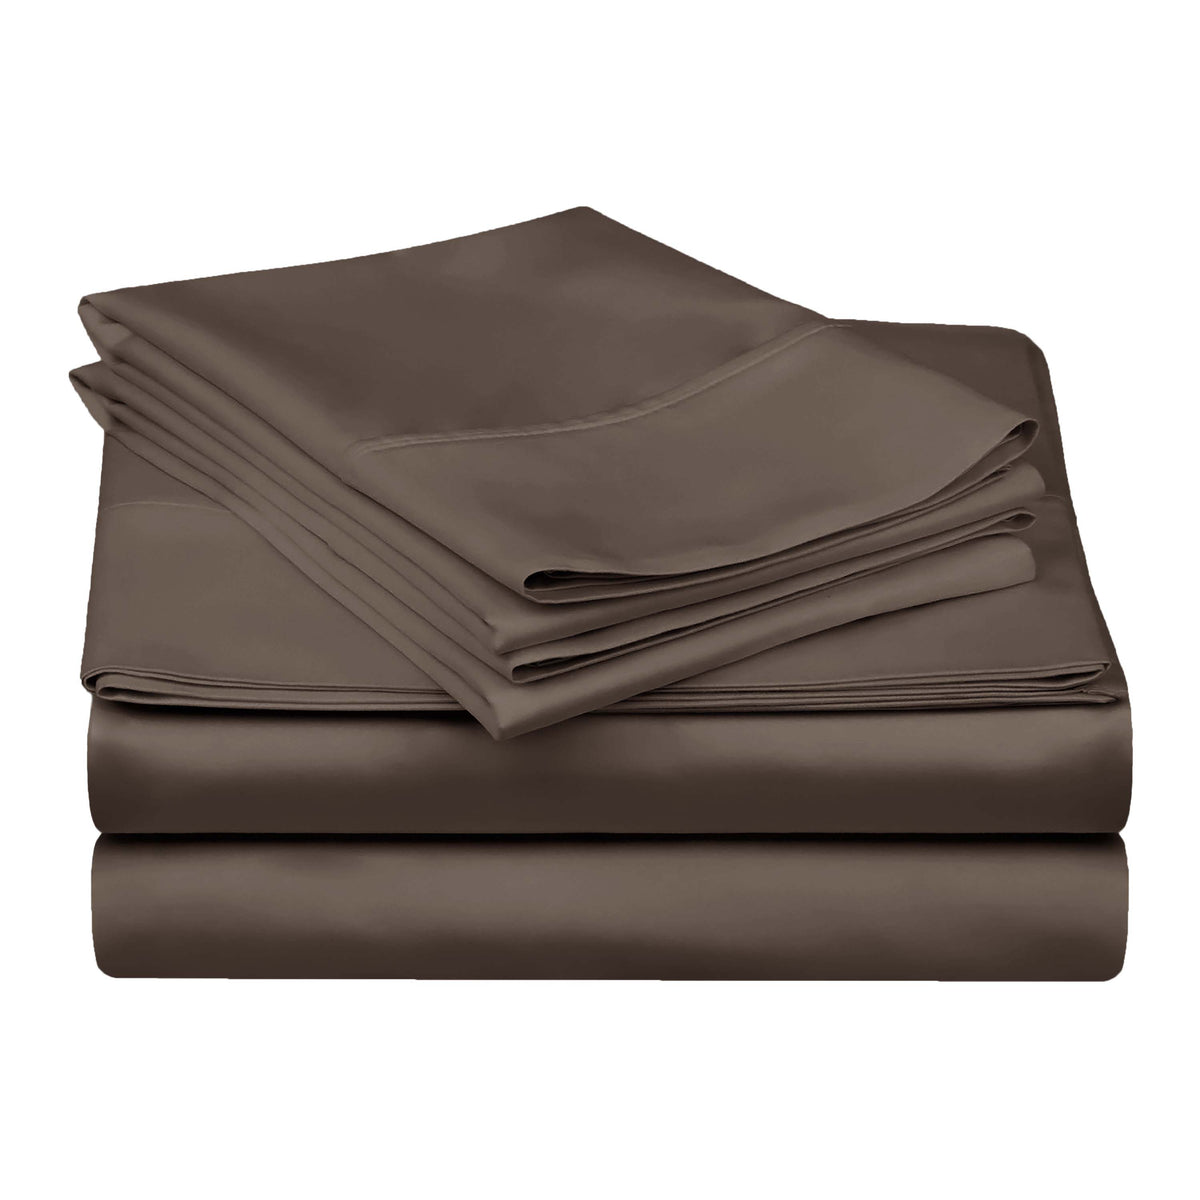 Superior Egyptian Cotton 300 Thread Count Solid Deep Pocket Bed Sheet Set - Grey